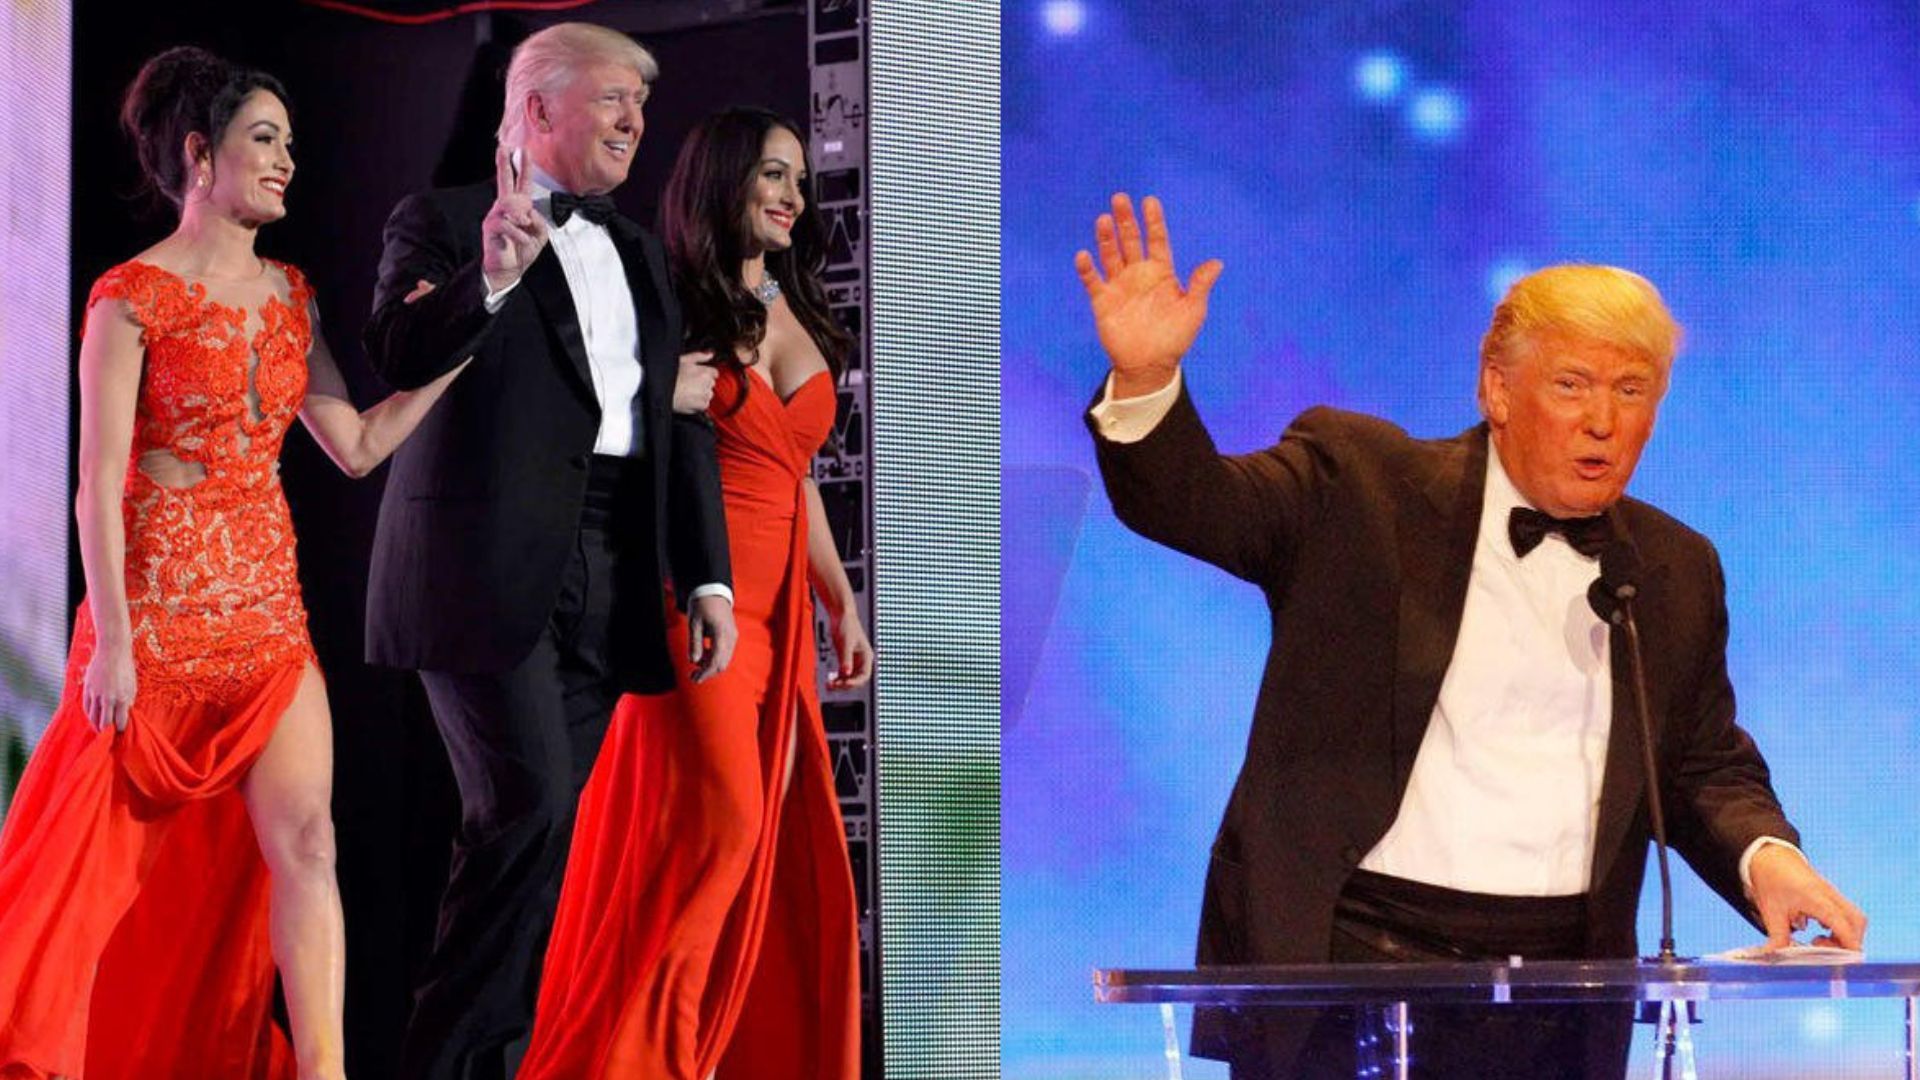 WWE Hall of Famer Donald Trump and The Bella twins